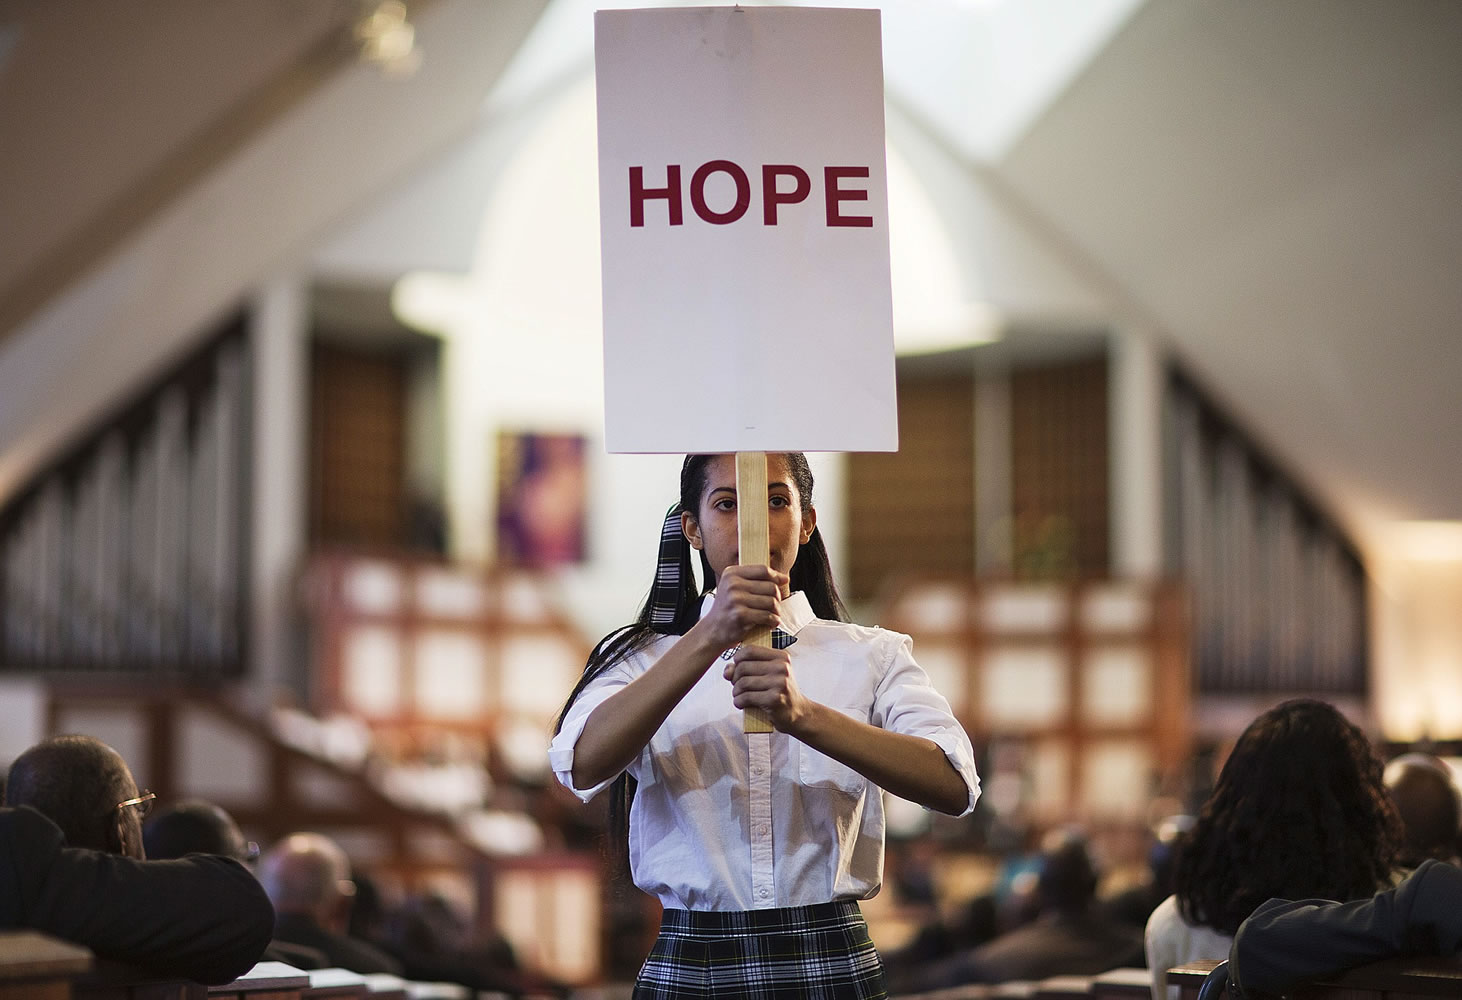 Jaiya Smith carries a sign down the aisle during a service honoring Rev. Martin Luther King Jr. at Ebenezer Baptist Church, where King preached, Monday, Jan. 19, 2015, in Atlanta.